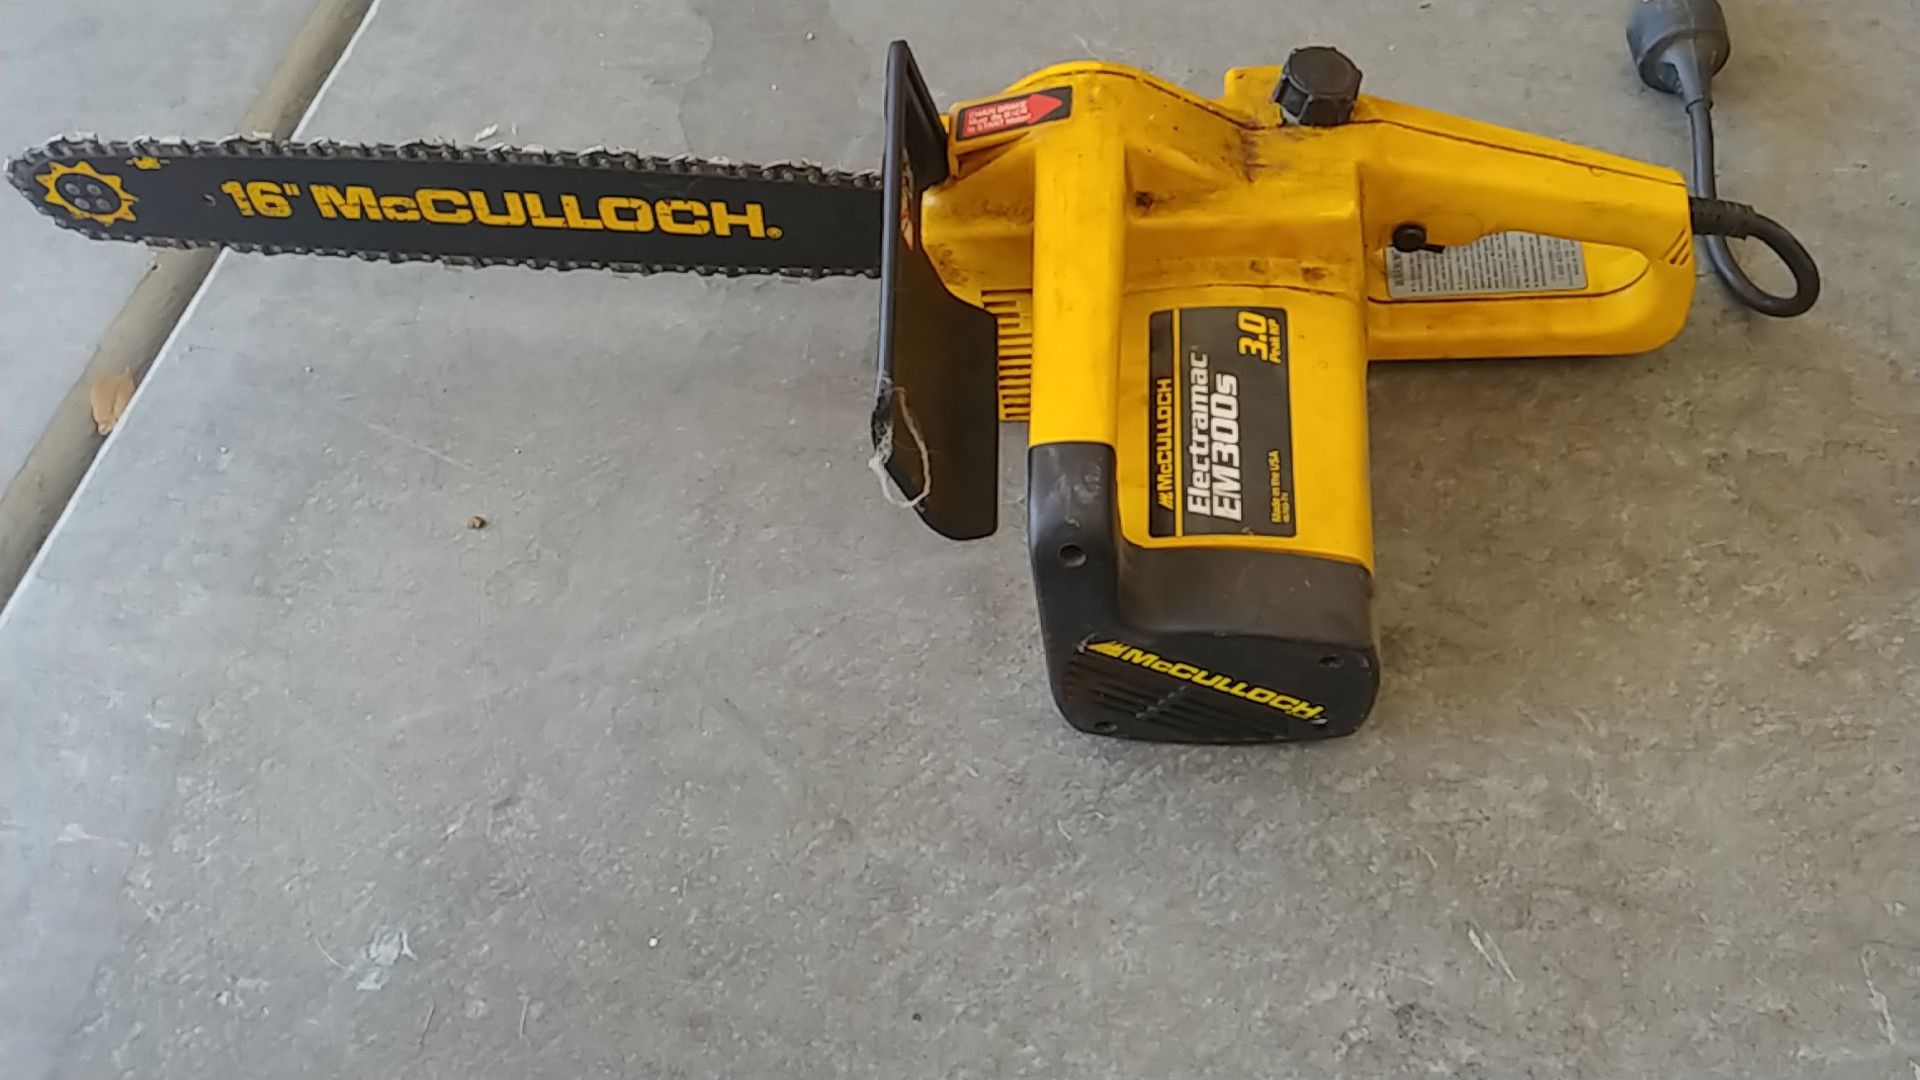 Nice McCullough 3.0 horsepower electric chainsaw